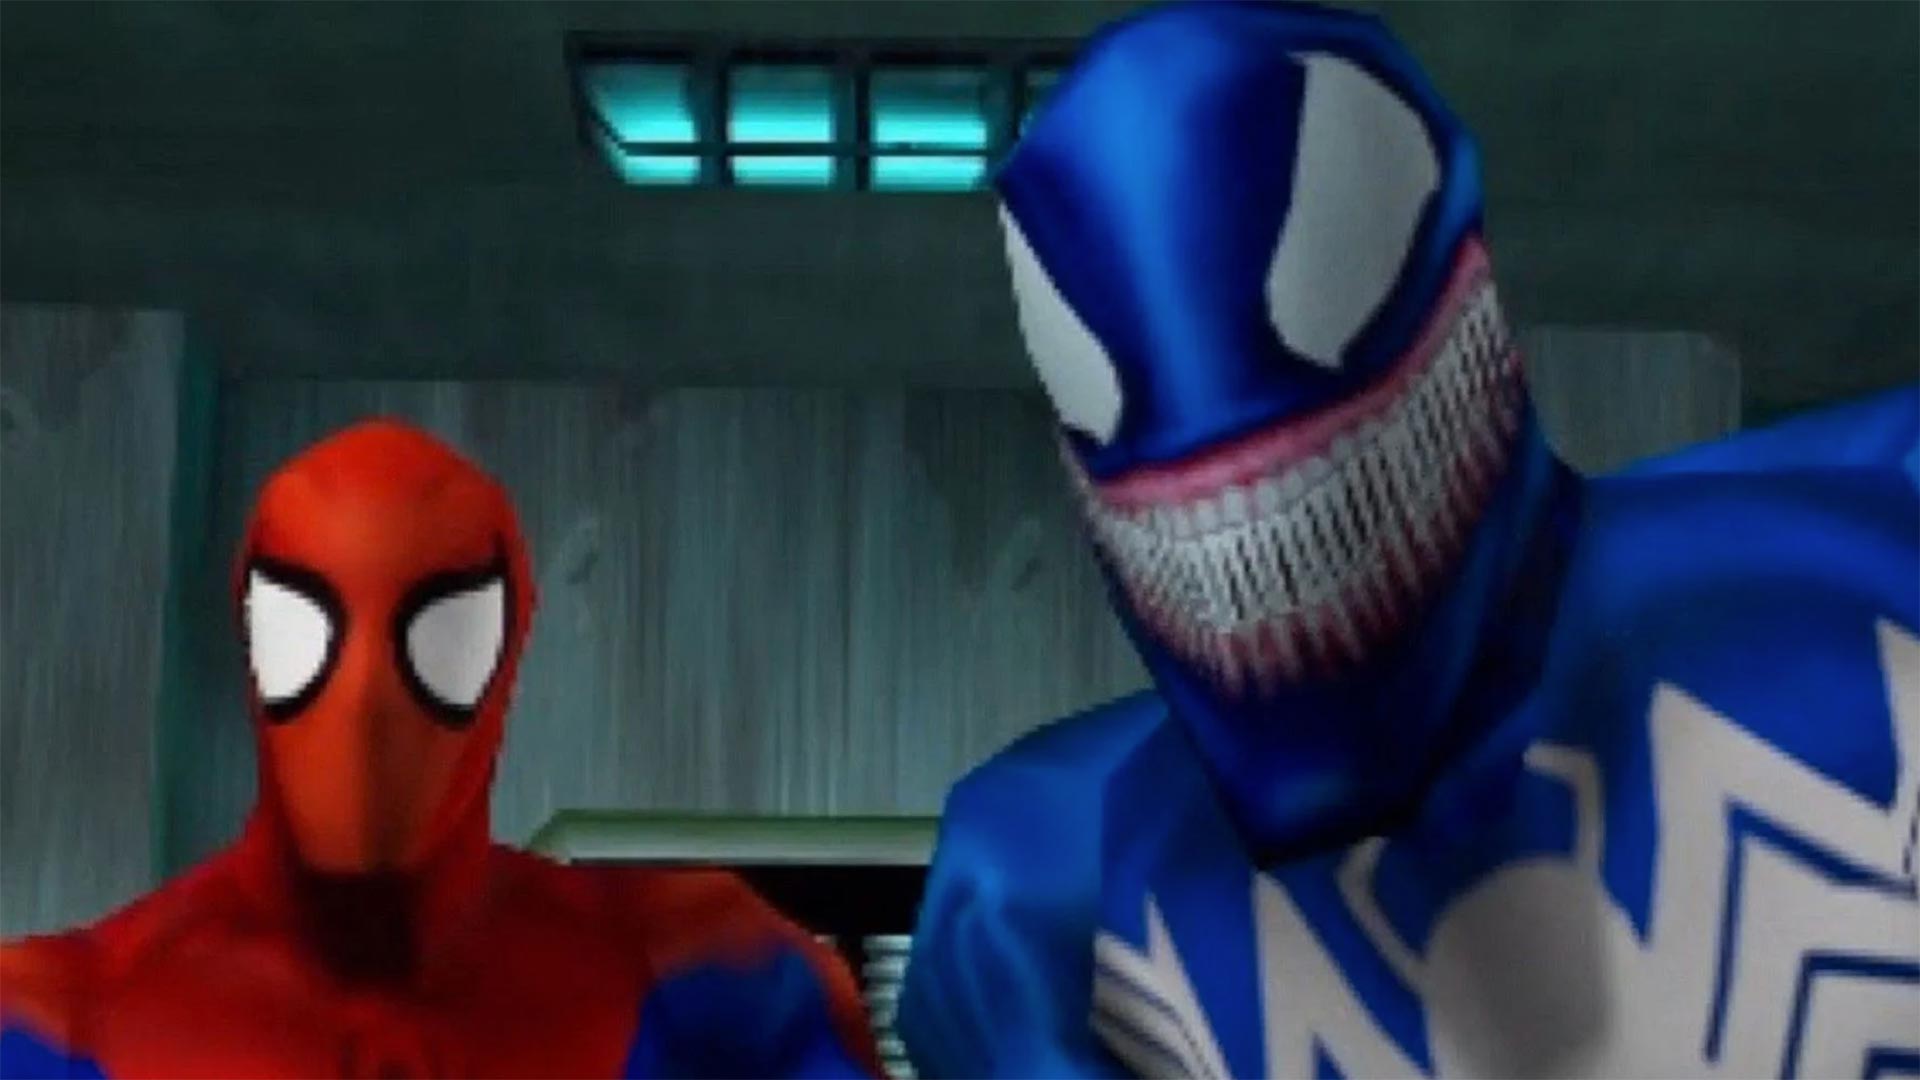 Spider-Man and Venom in the PS1 Spider-Man game